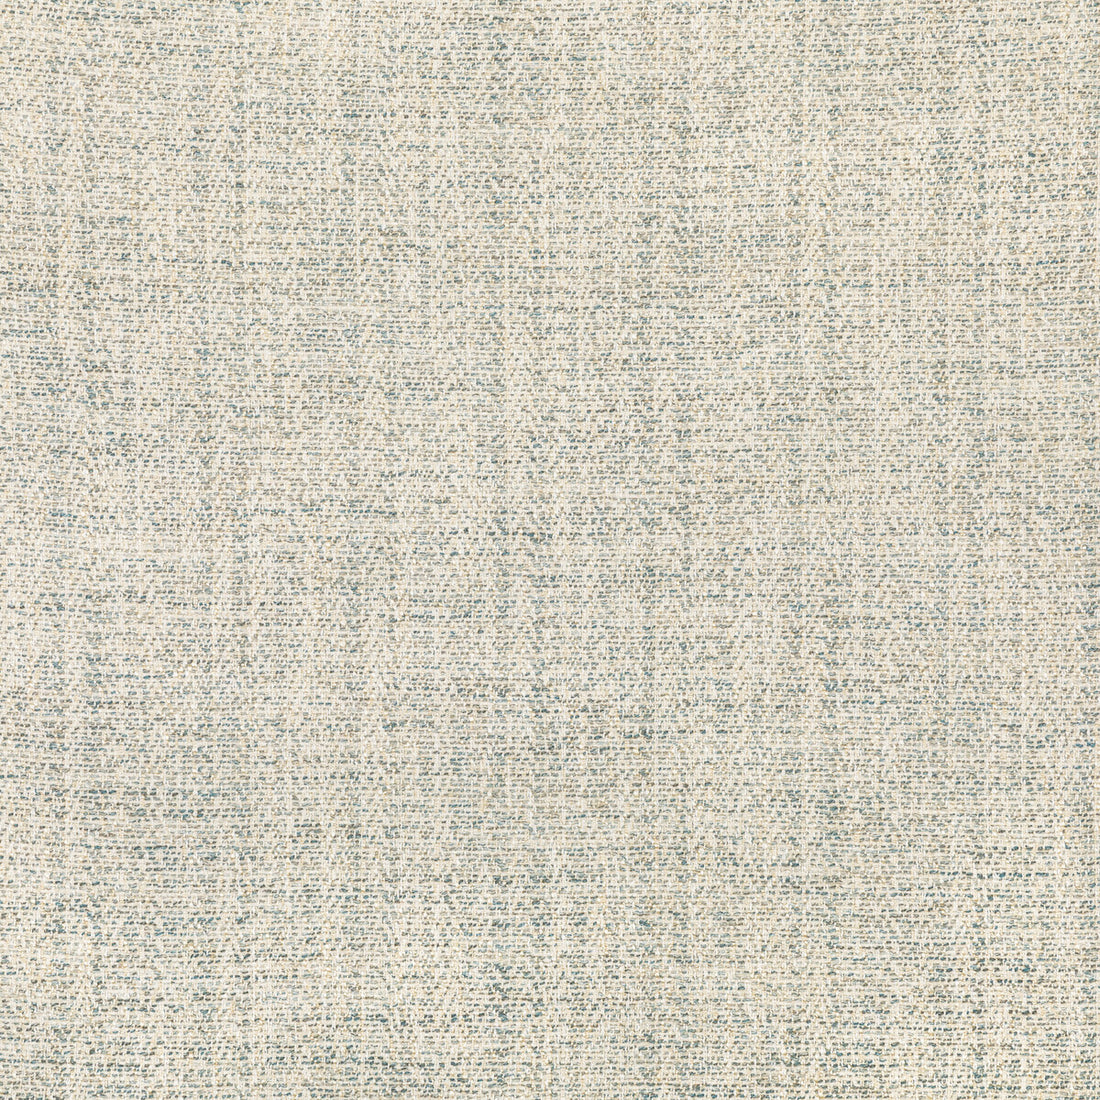 Alfaro Weave fabric in sky color - pattern 2021107.15.0 - by Lee Jofa in the Triana Weaves collection